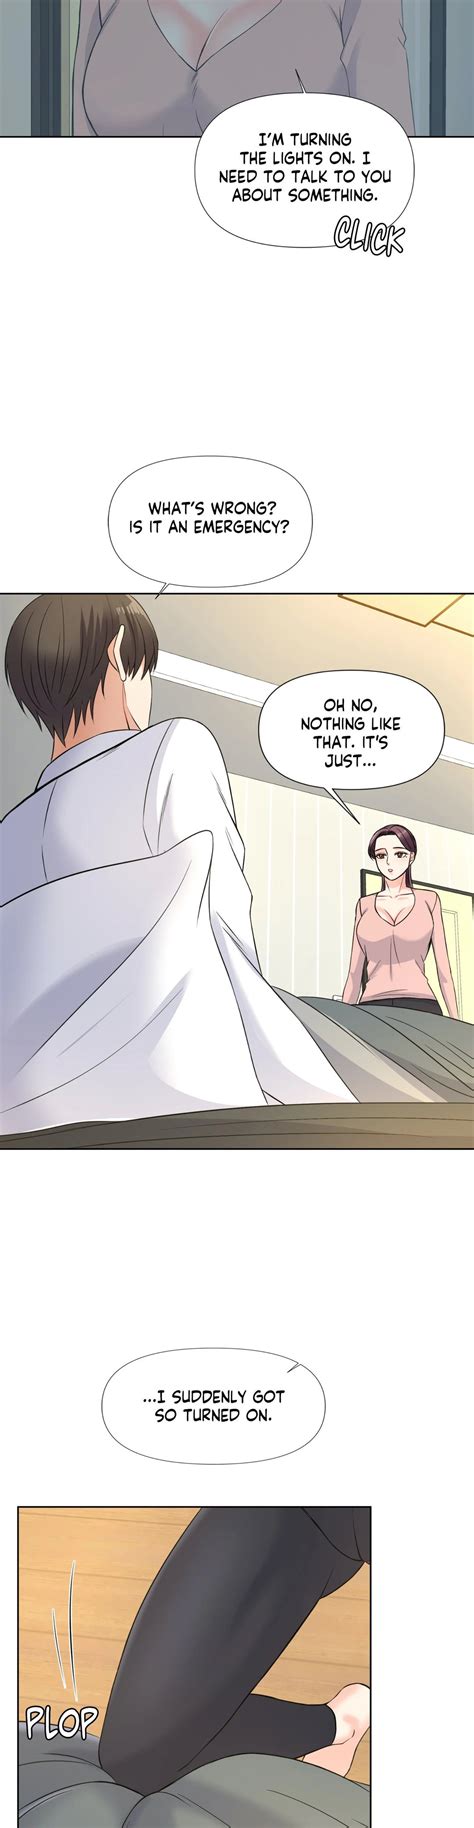 Roommates with benefits manwha - Roommates with Benefits. Chapter 25 raw. Description Roommates with Benefits: Choi Taeshik lives a quiet, normal life. He works hard at the office, tame good care of his body occasionally goes on dates, and 